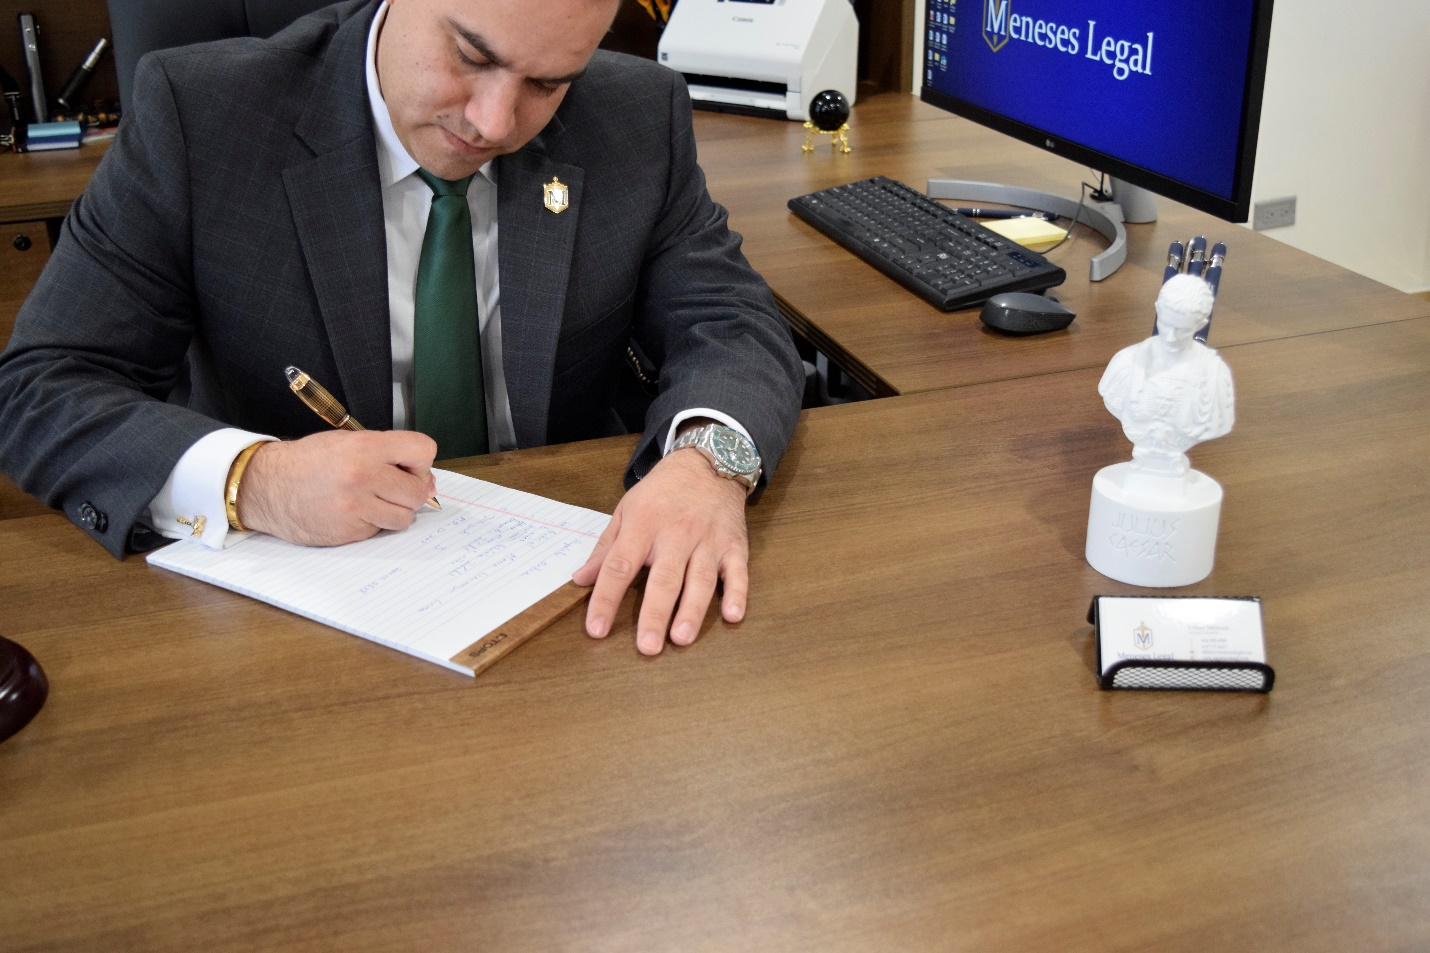 A lawyer sitting at a desk writing on a notepad